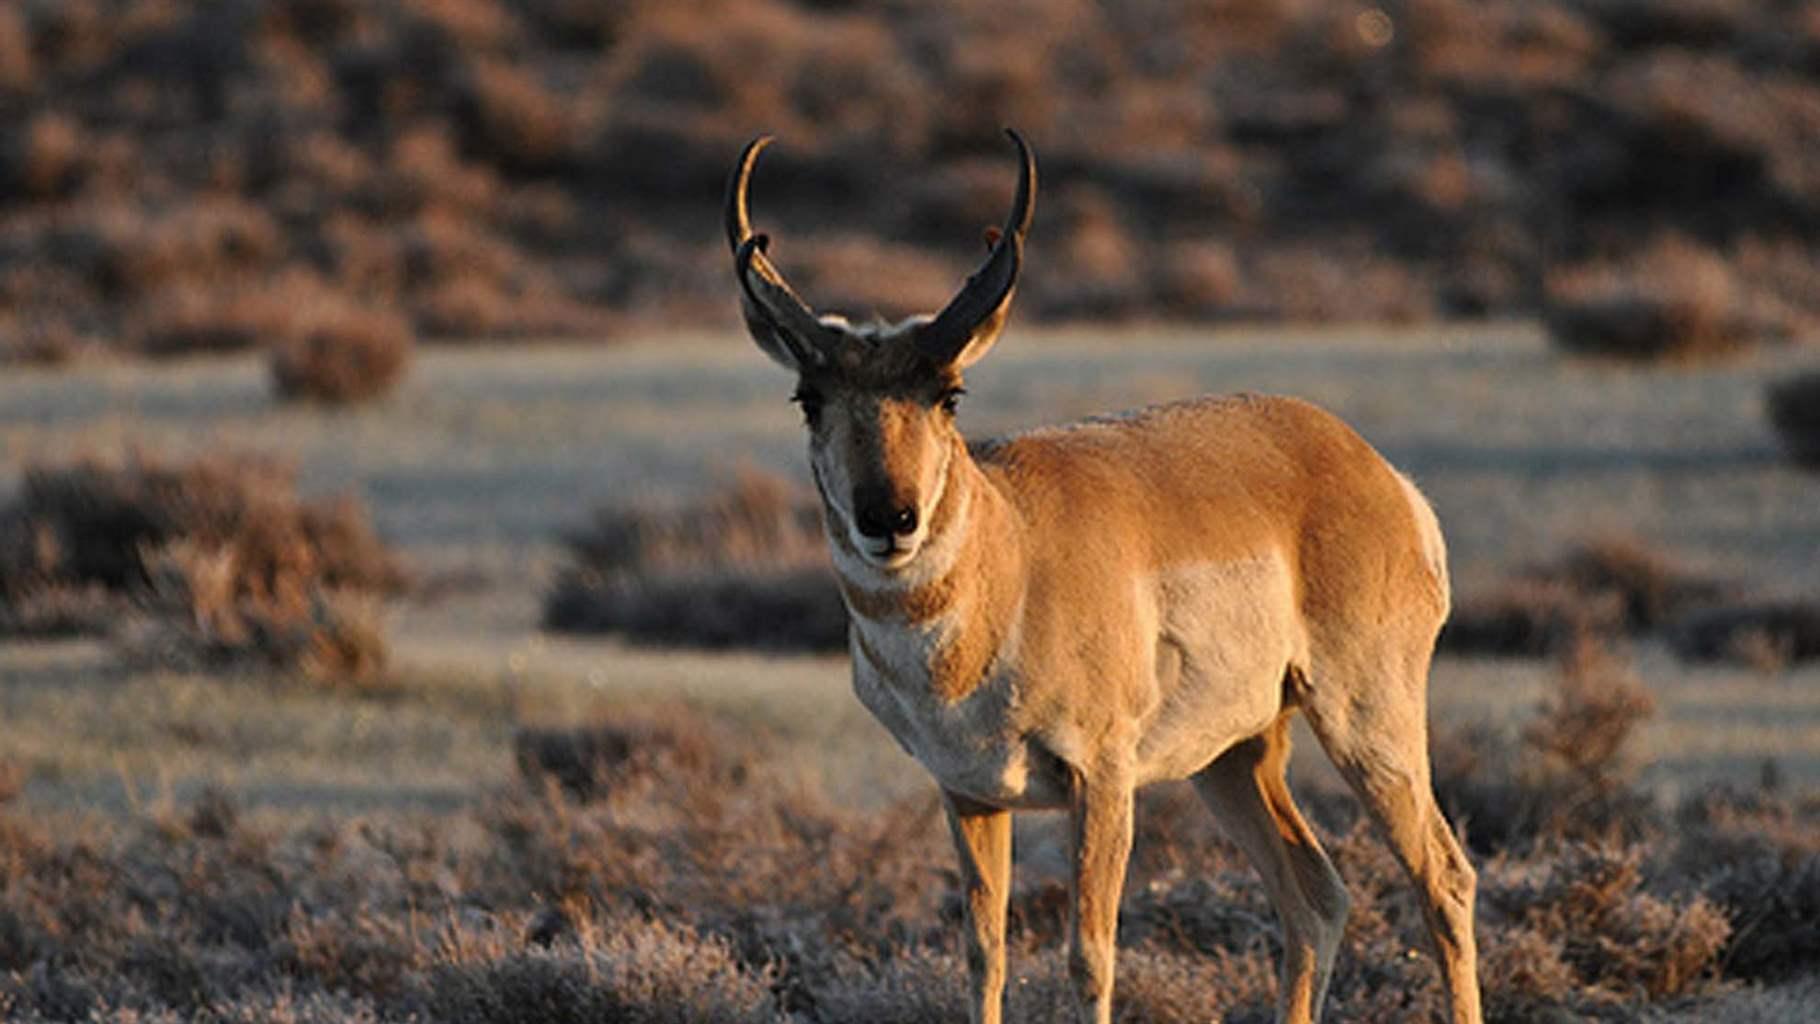 Here is a pronghorn antelope photographed at a greater sage-grouse lek near Bridgeport, CA.